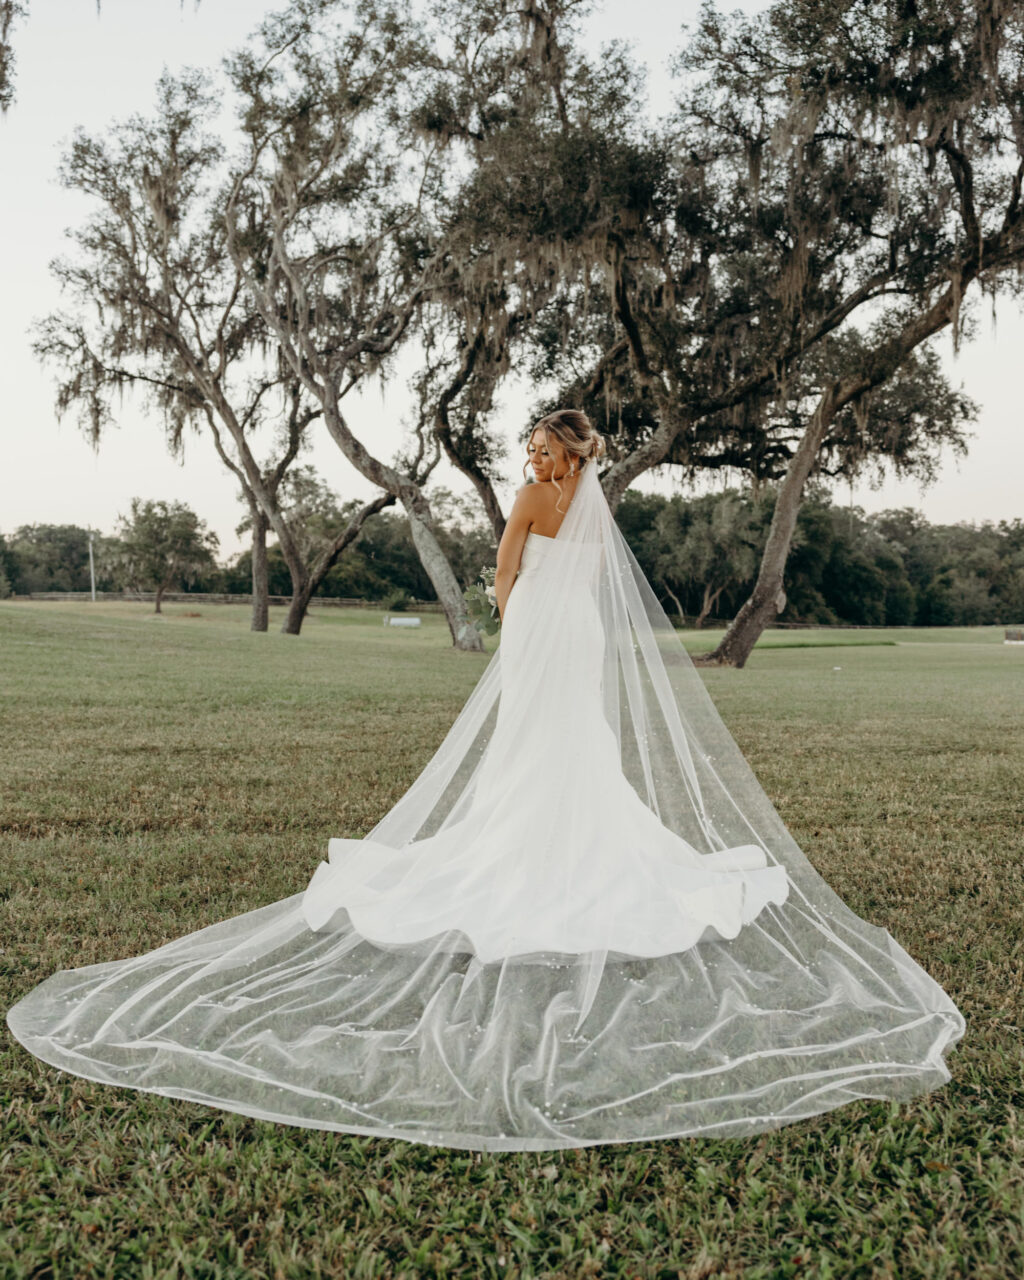 Bridal Portrait with Cathedral Veil | Bride in Fit and Flare Crepe Wedding Dress